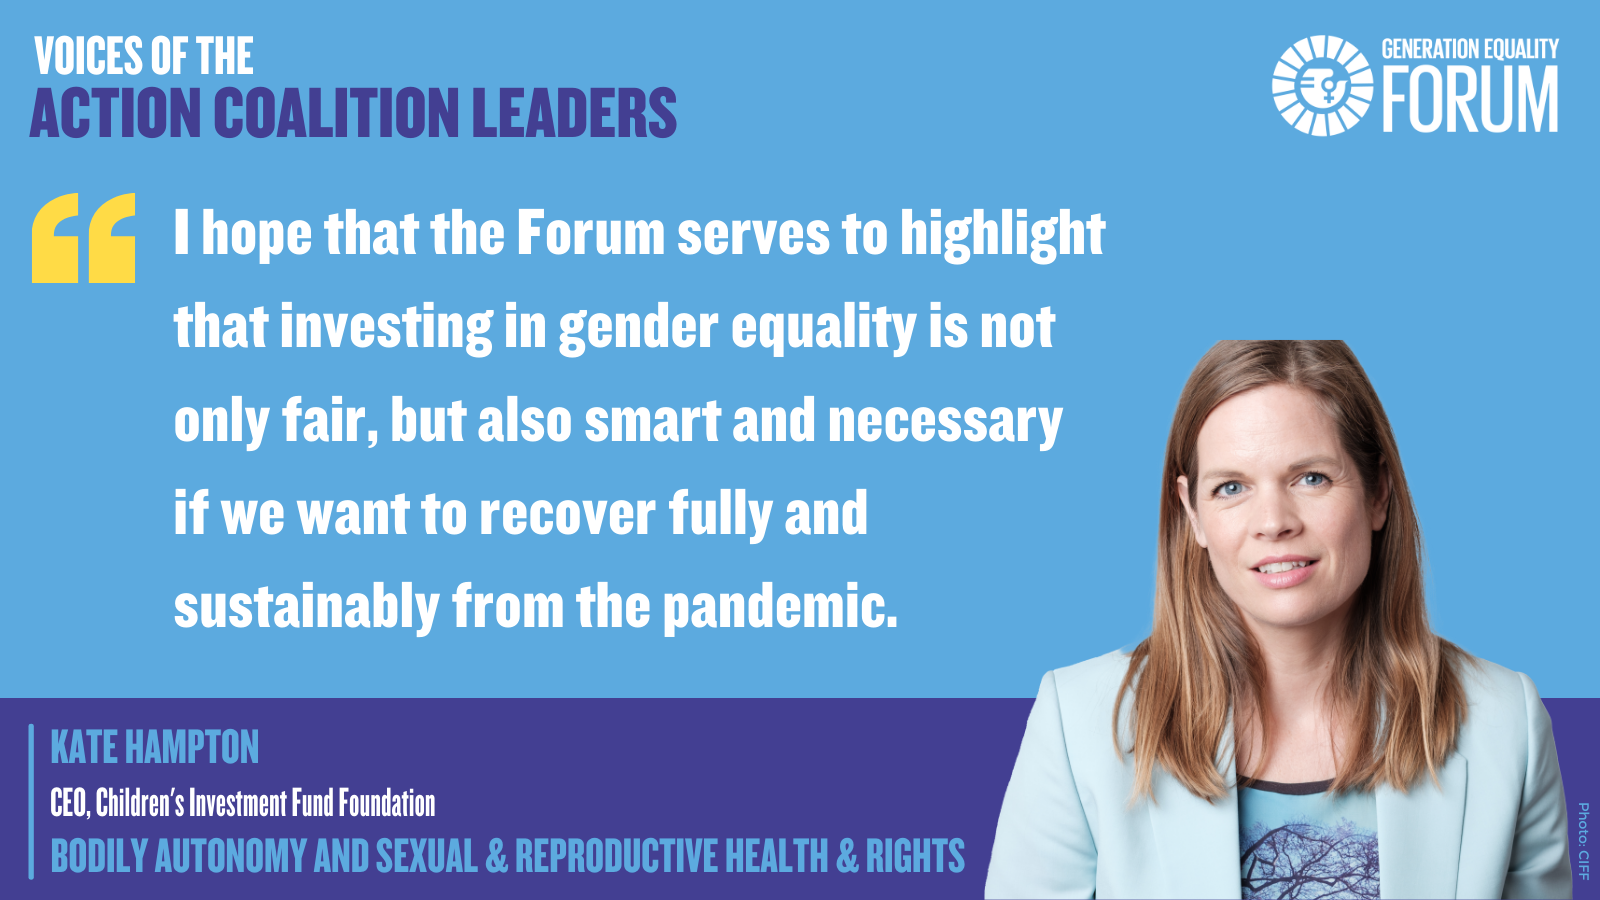 "I hope that the Forum serves to highlight that investing in gender equality is not only fair, but also smart and necessary if we want to recover fully and sustainably from the pandemic." - Kate Hampton